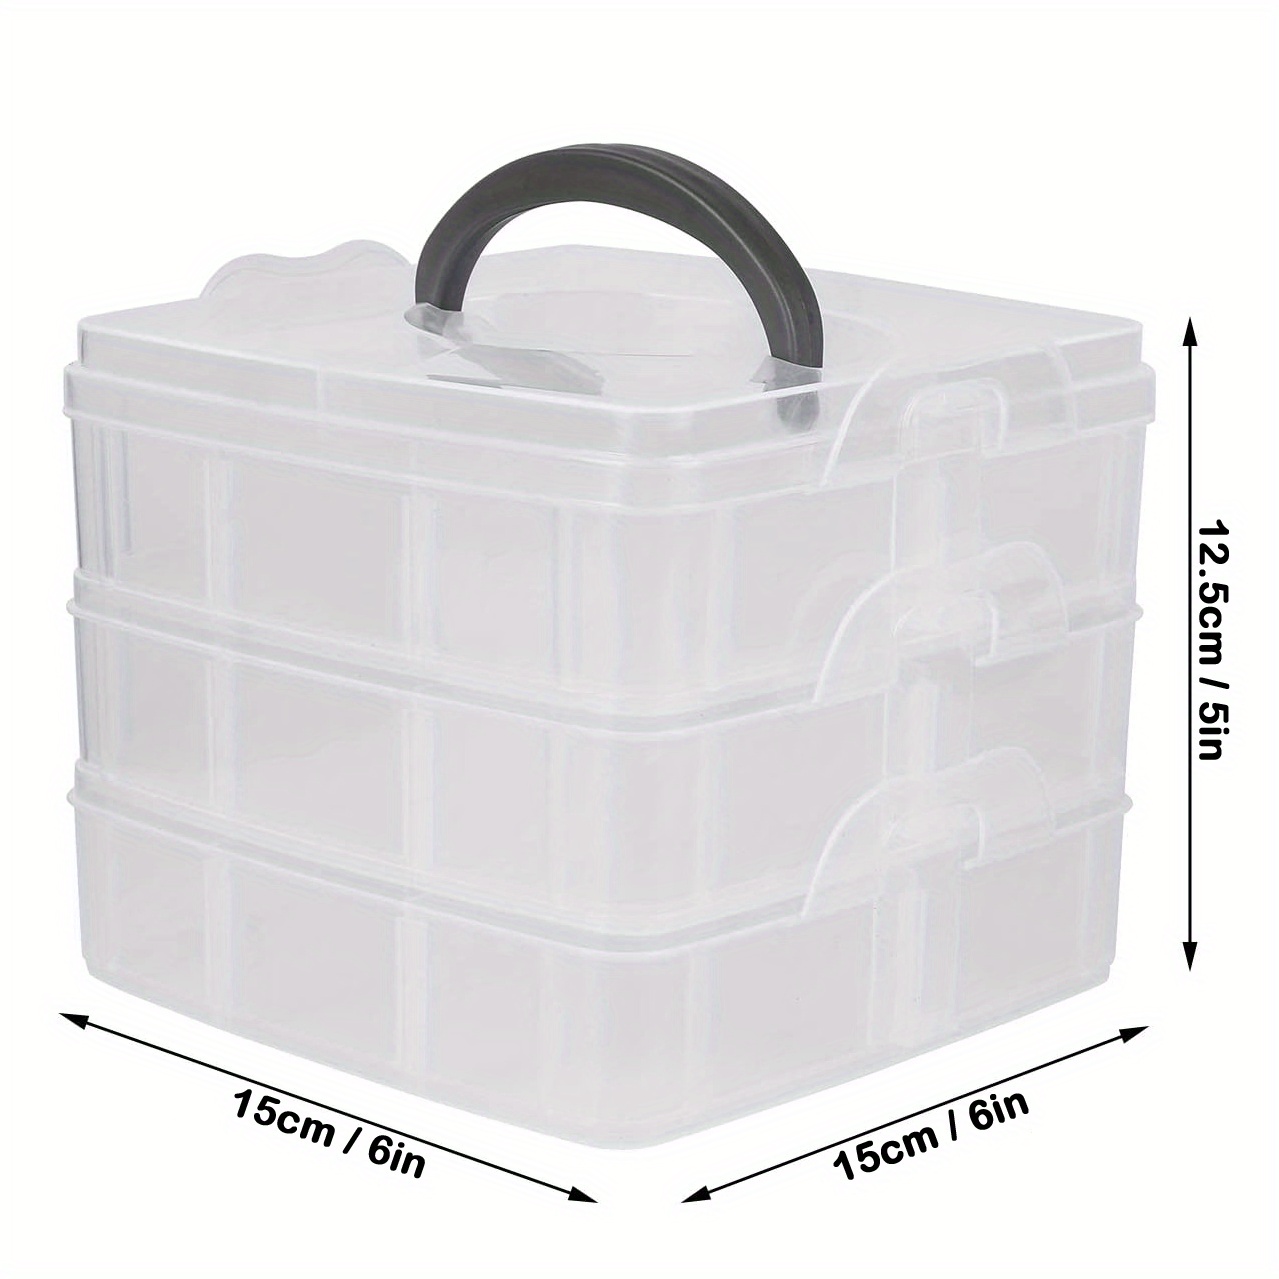 Dropship 3/6PCS Large & Small Clear Plastic Storage Bins W/ Lid Stackable Organizer  Boxes to Sell Online at a Lower Price